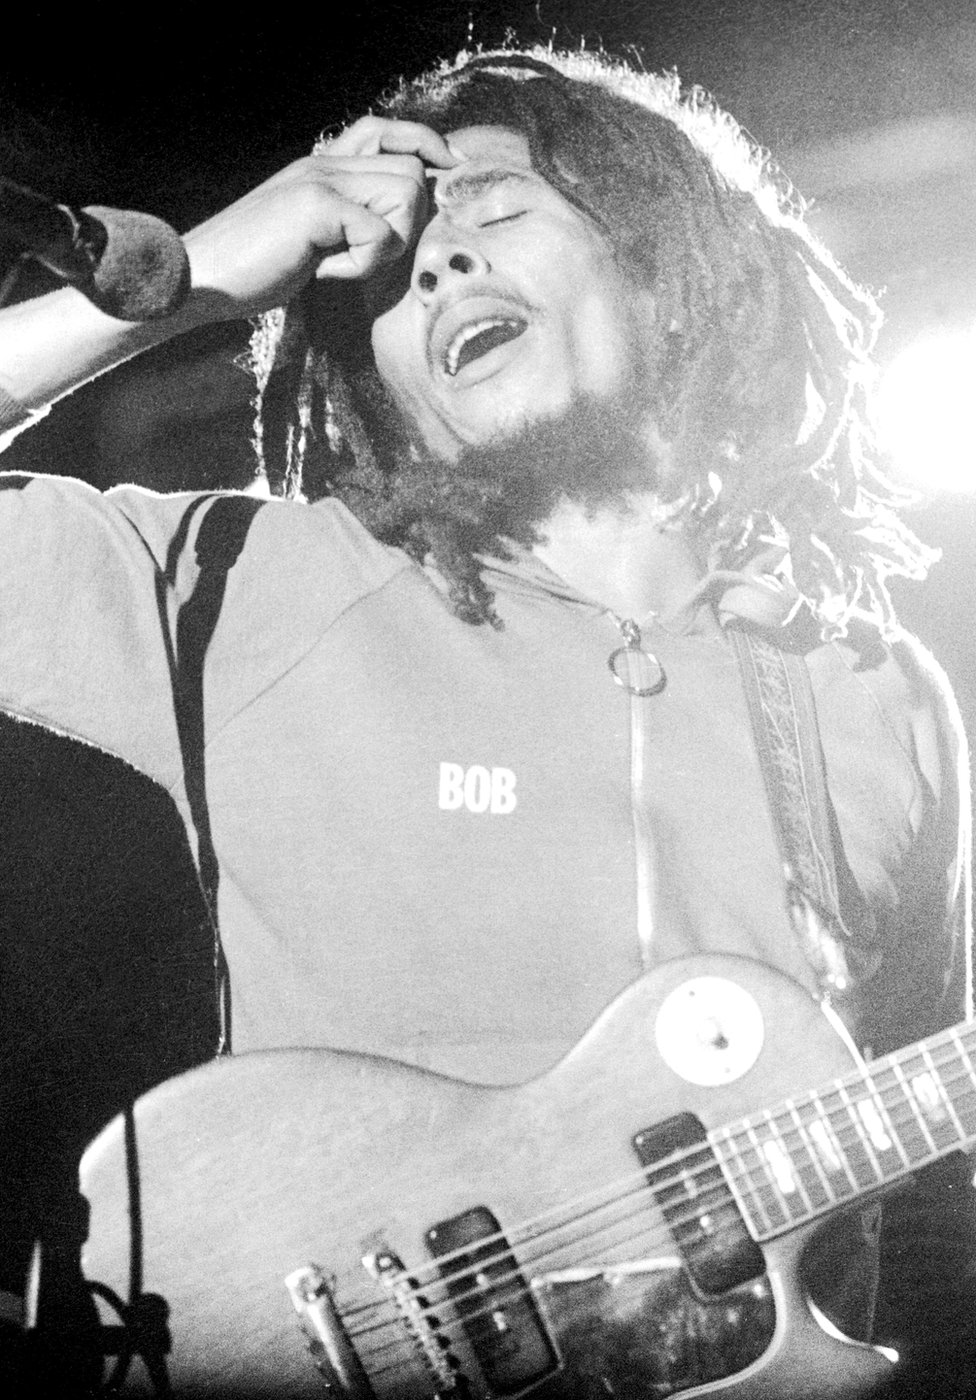 Bob Marley performs at the West Coast Rock Show at Ninian Park in Cardiff, Wales, in 1976